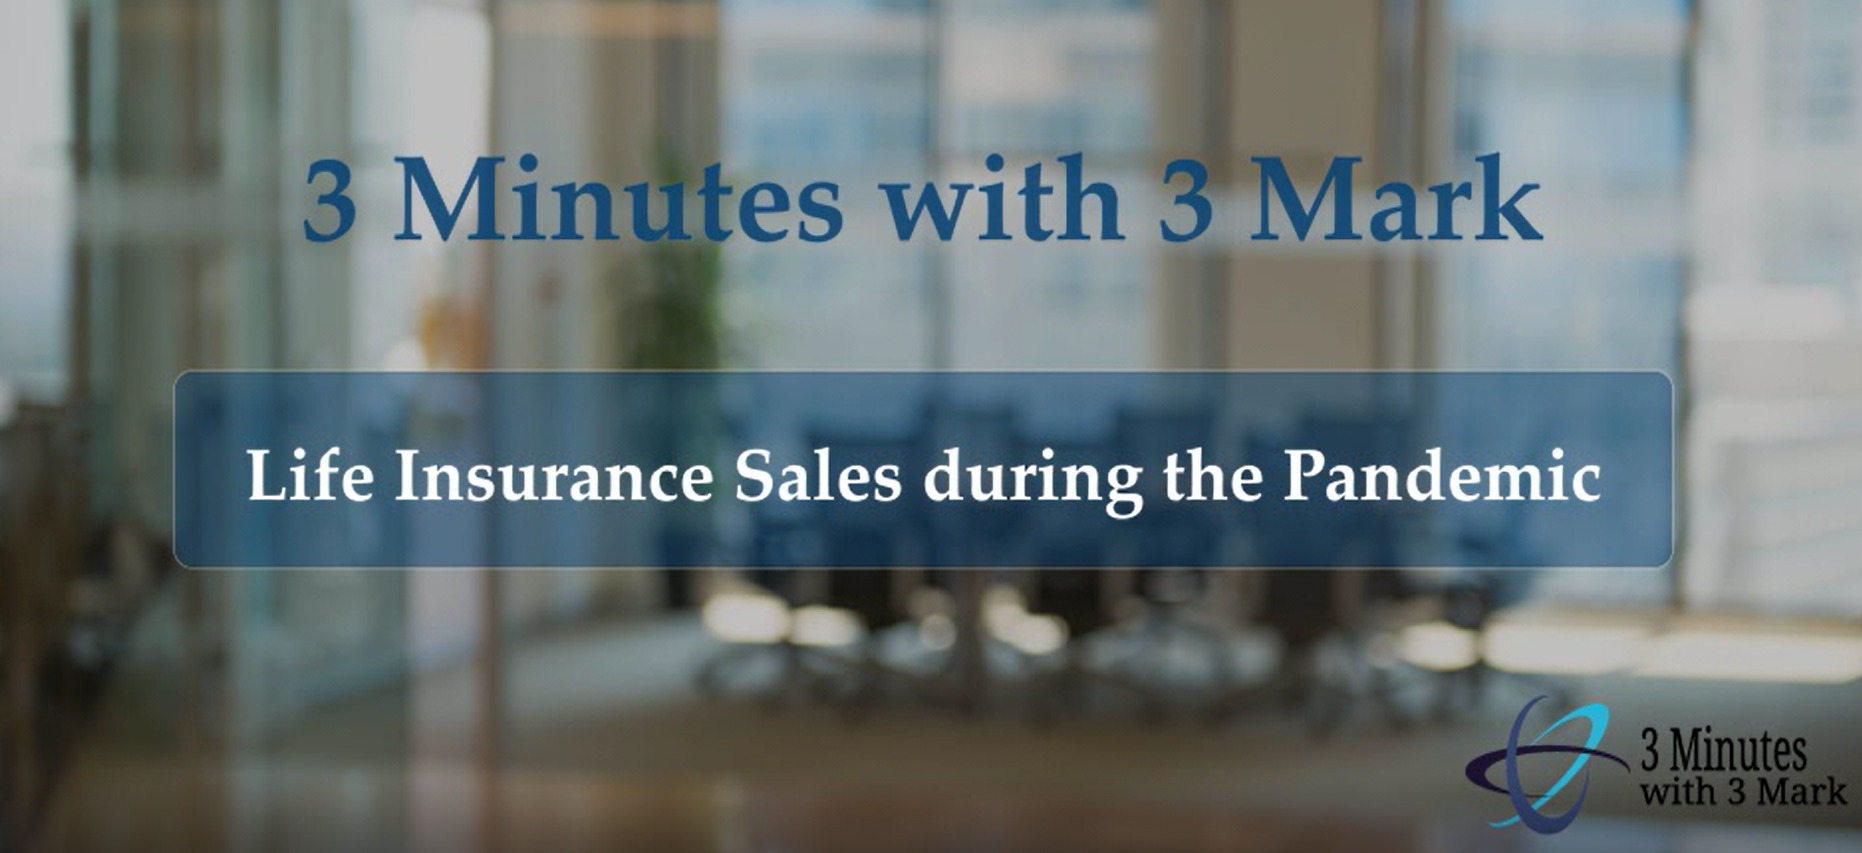 3 Minutes with 3 Mark - Life Insurance Sales during the Pandemic - Rosanne Kaufmann